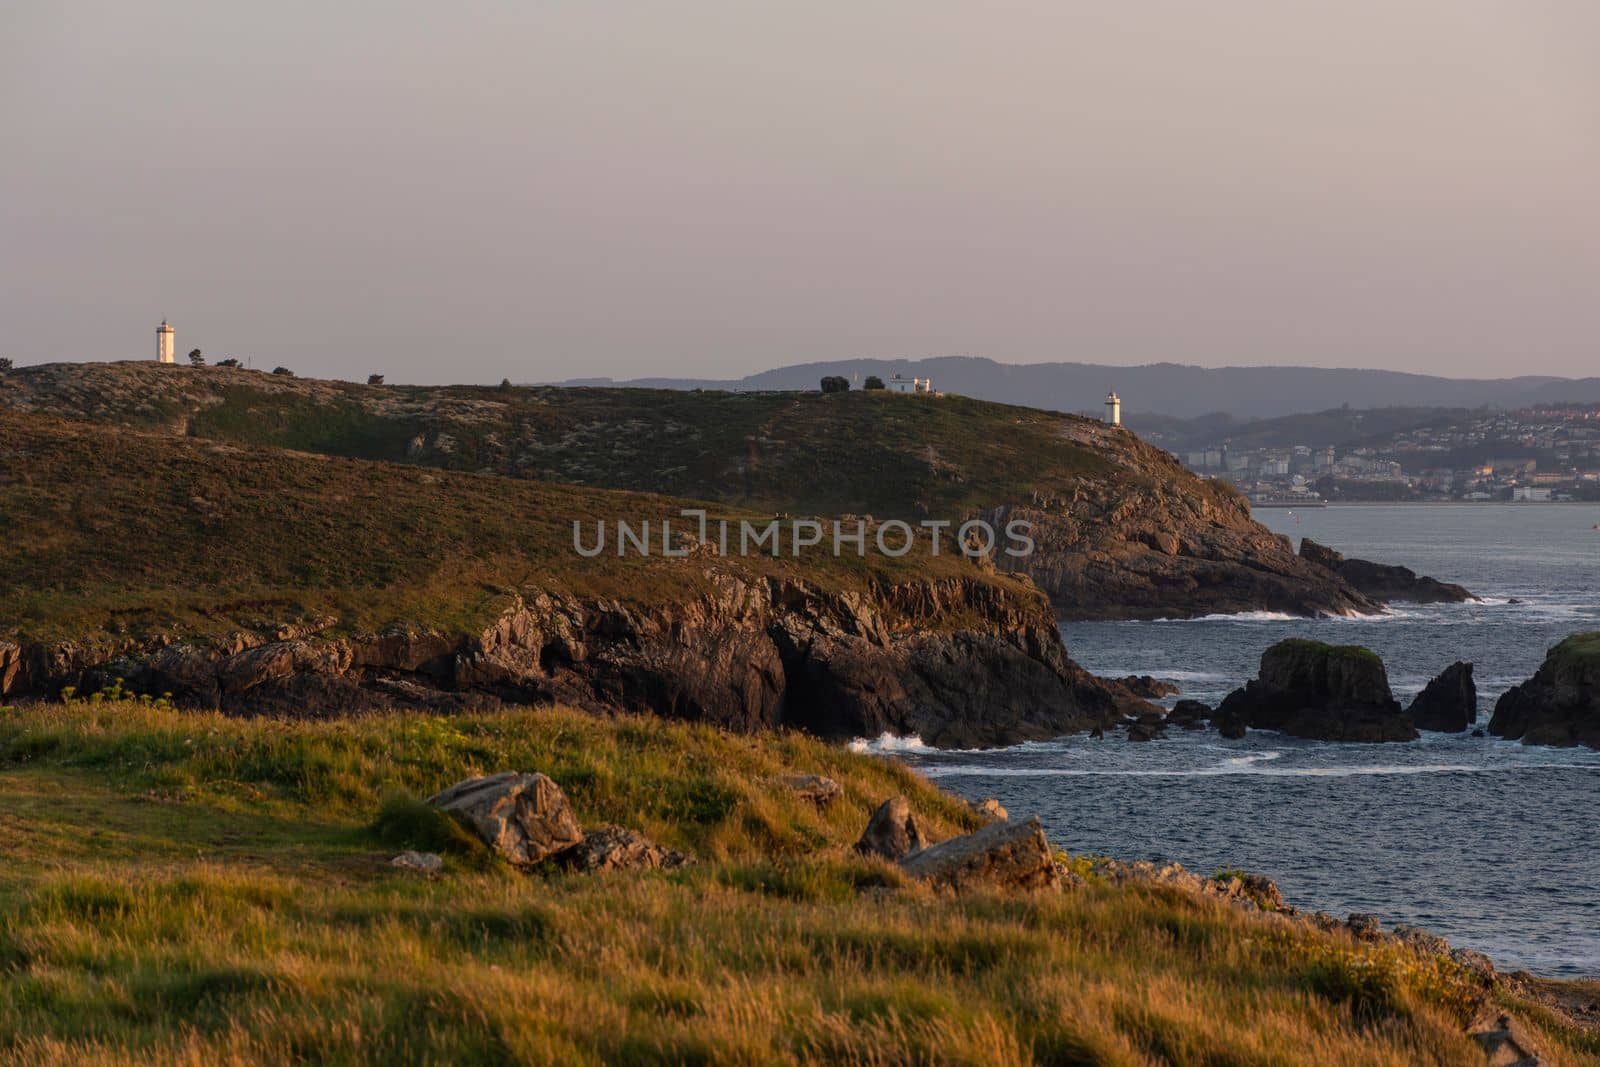 Lighthouses of Mera from Seixo Branco, in Oleiros, Galicia by scasal15